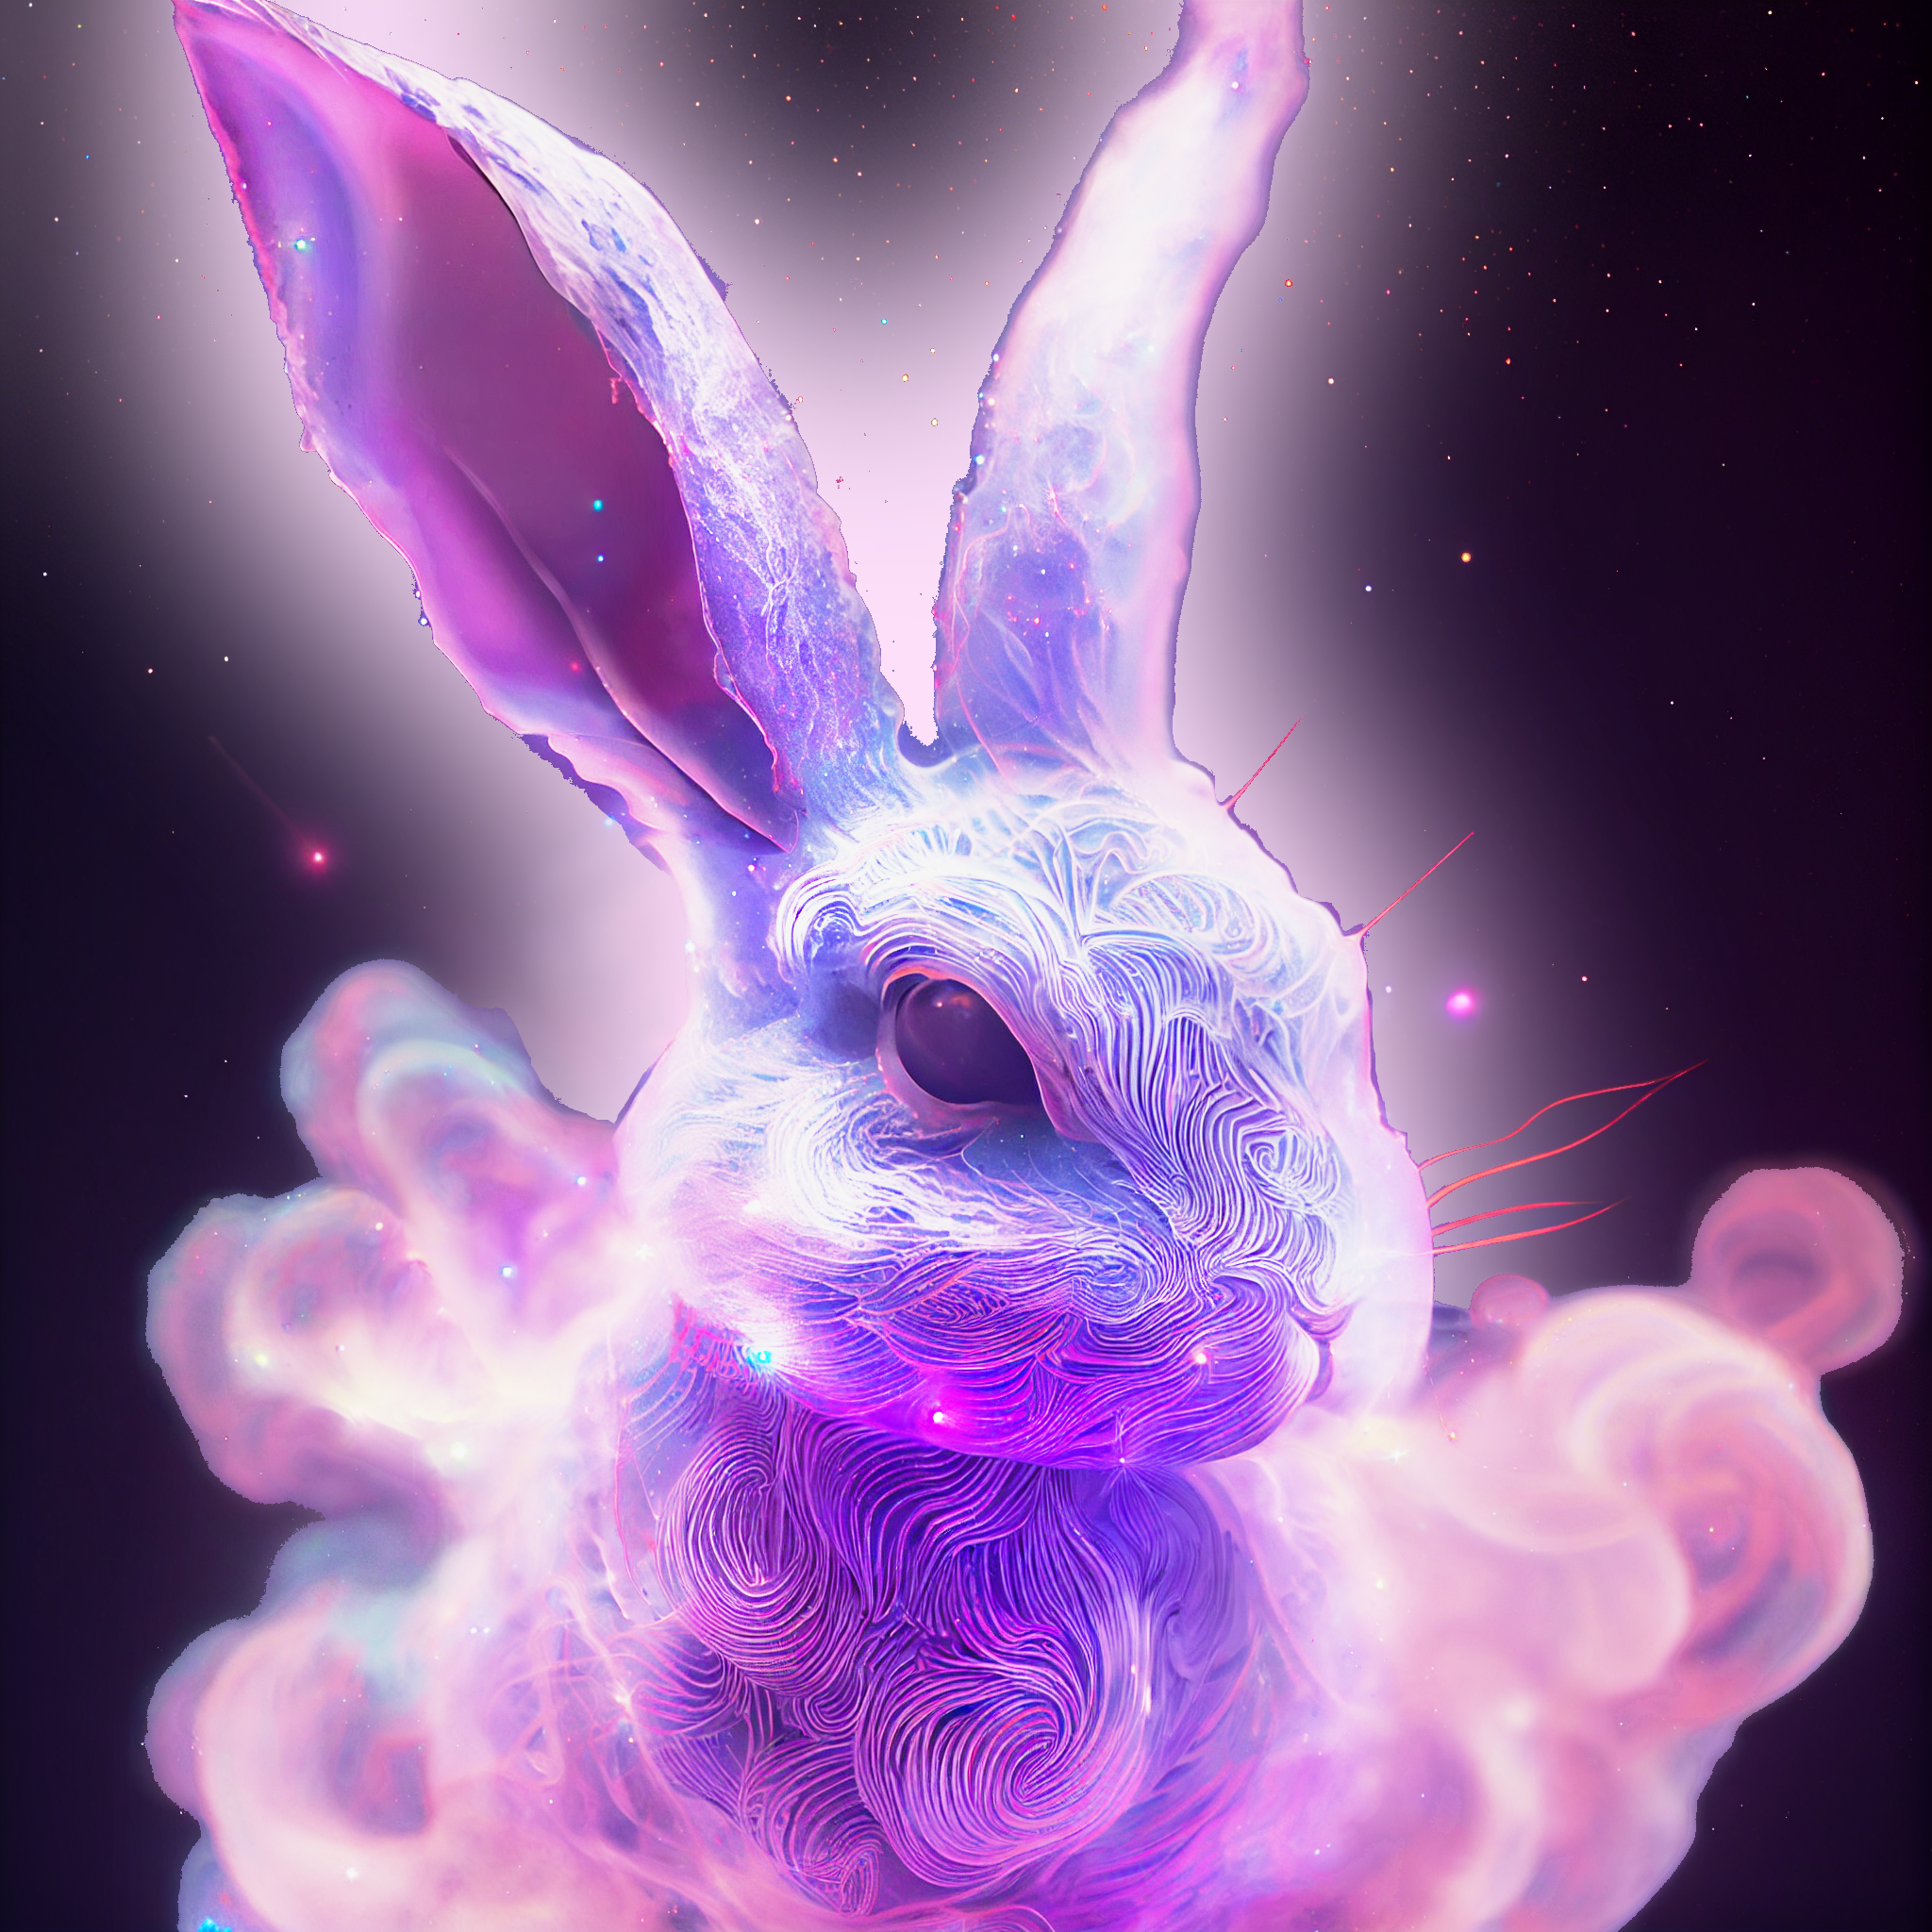 A glowing white star bunny, surrounded by pink magic